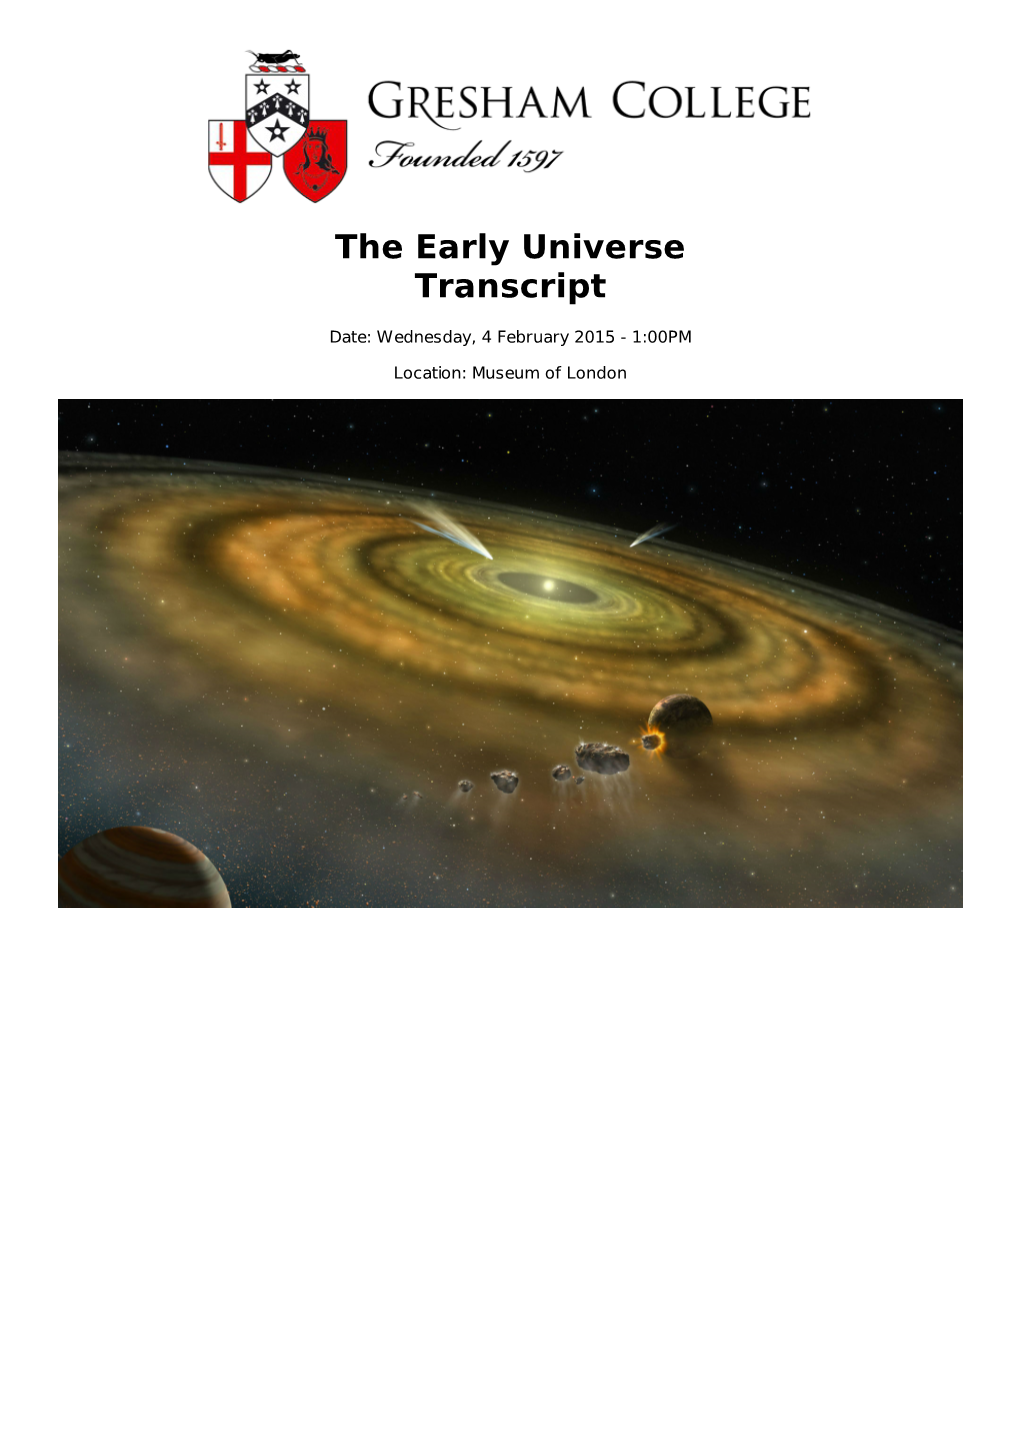 The Early Universe Transcript